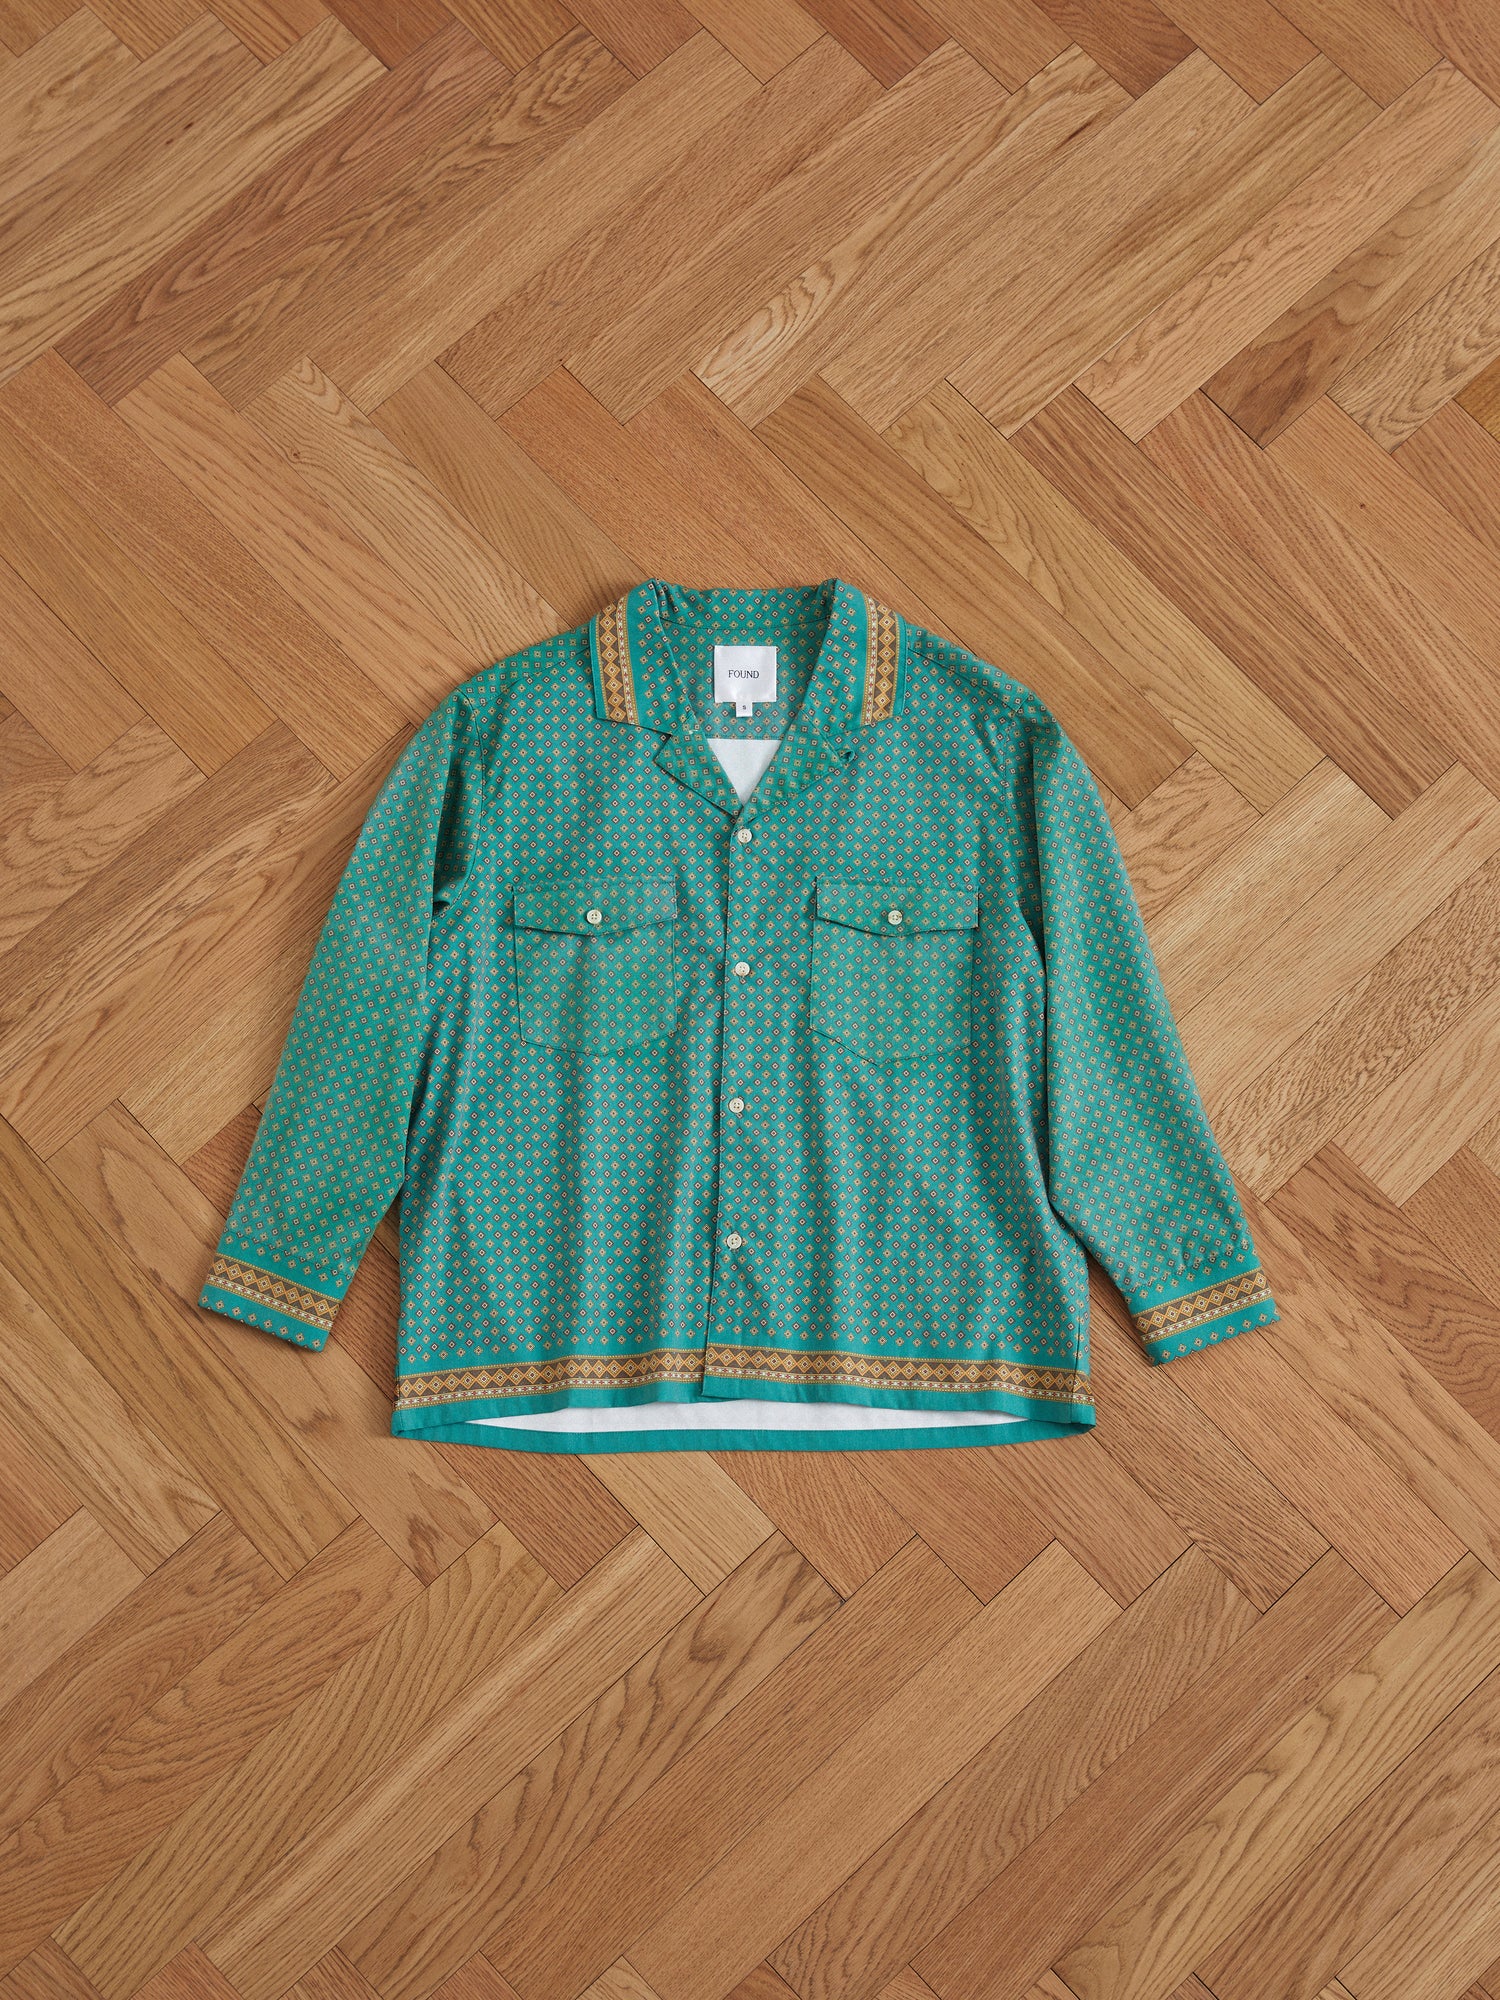 A Found Arbor Long Sleeve Camp Shirt with indo patterns lies on a wooden floor.